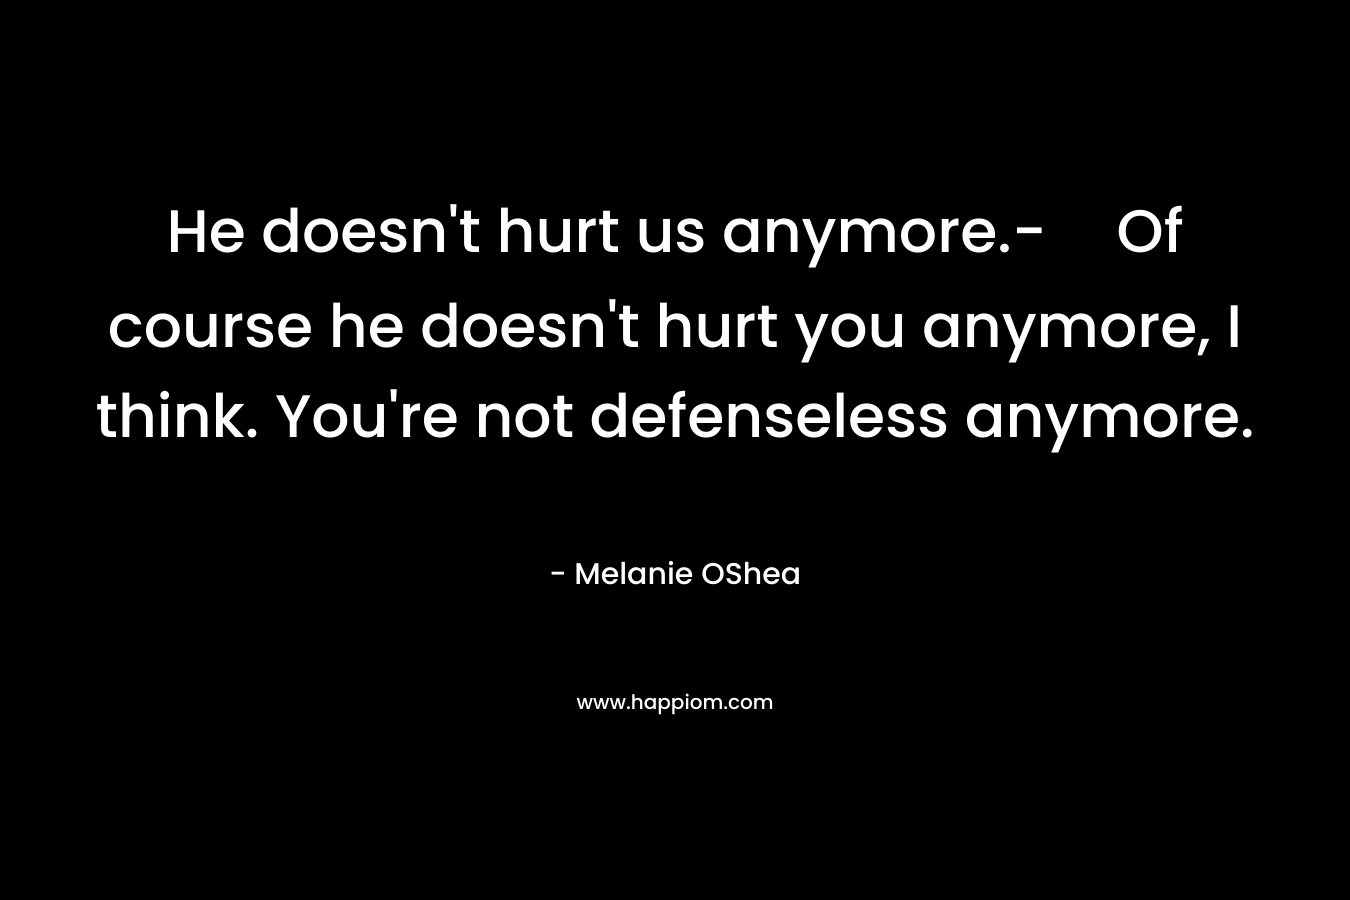 He doesn't hurt us anymore.-Of course he doesn't hurt you anymore, I think. You're not defenseless anymore.